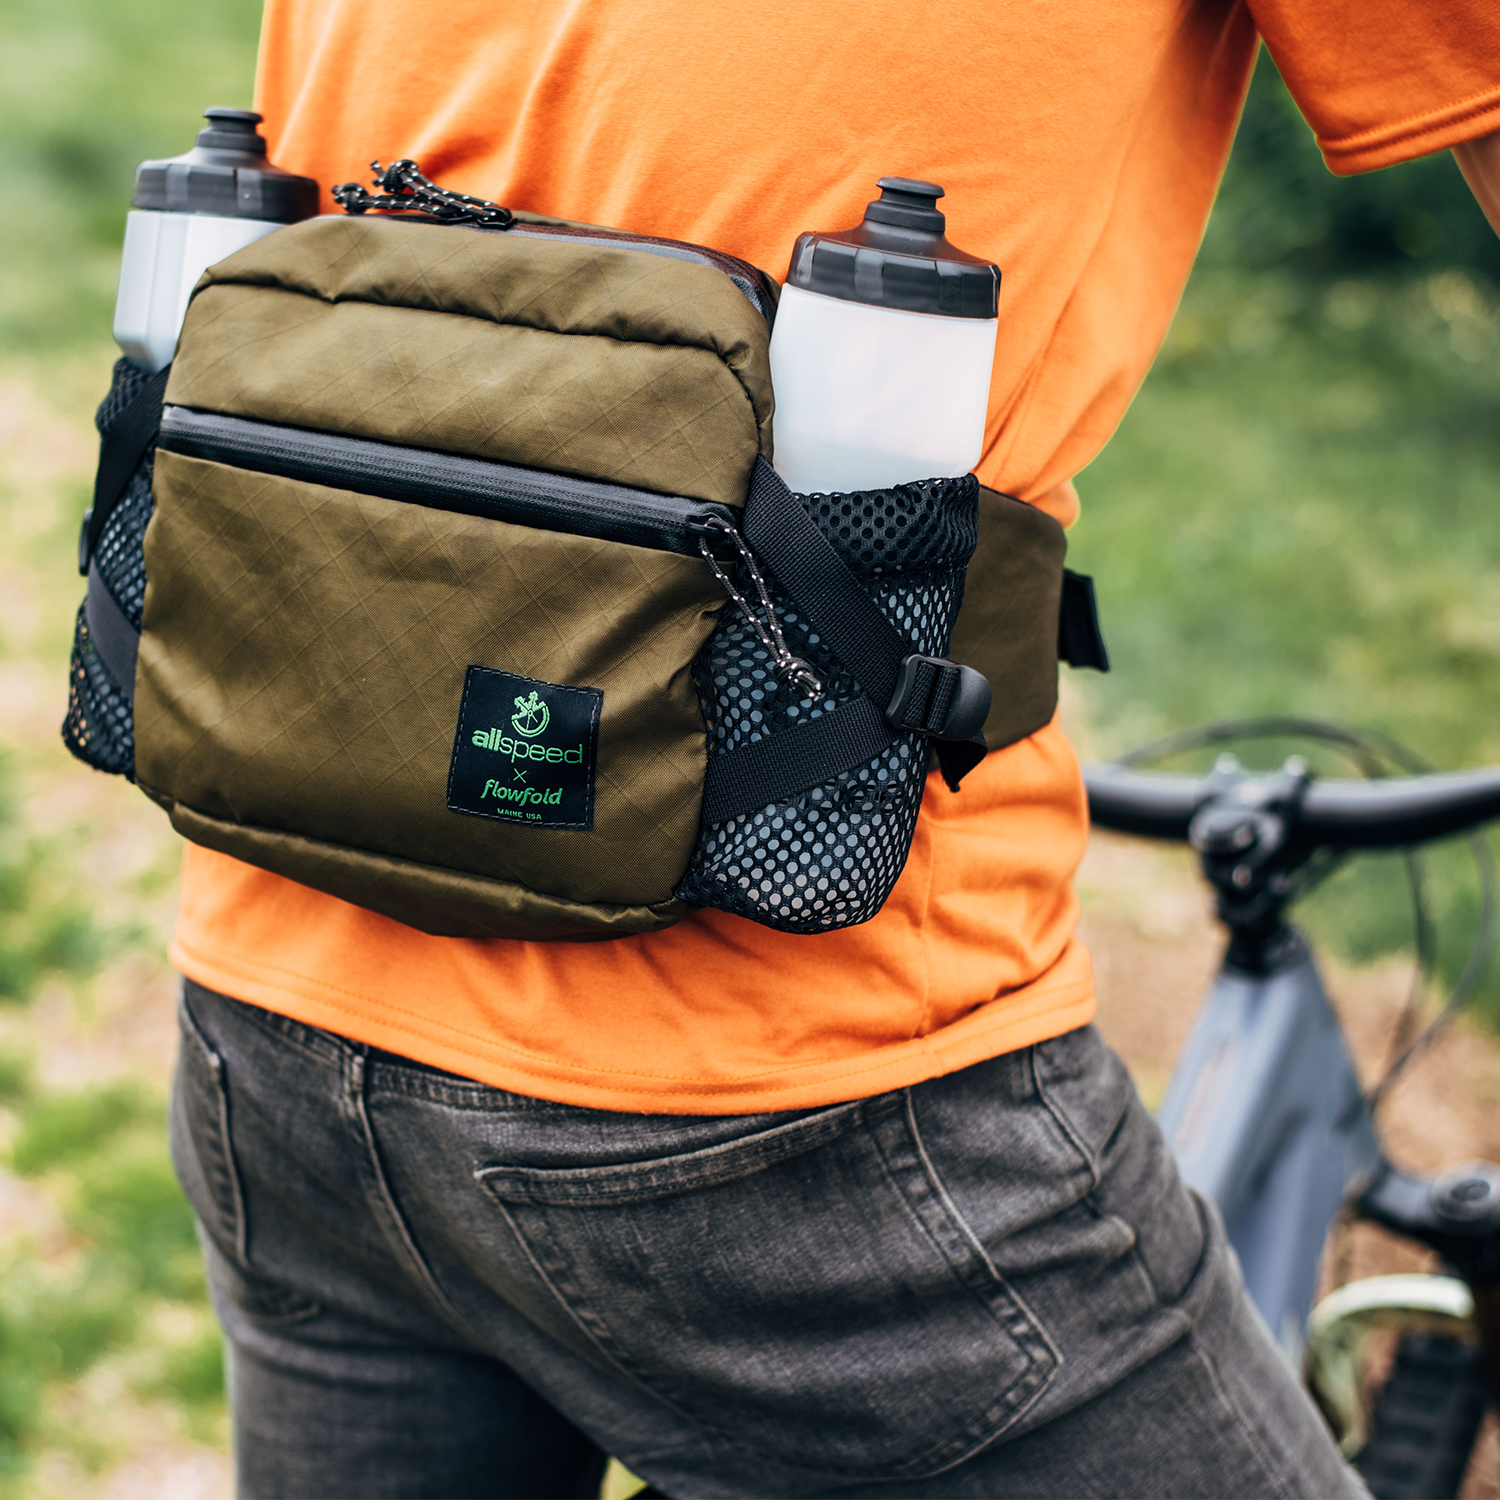 Allspeed x Flowfold Hip Pack - Recycled Olive, On Model